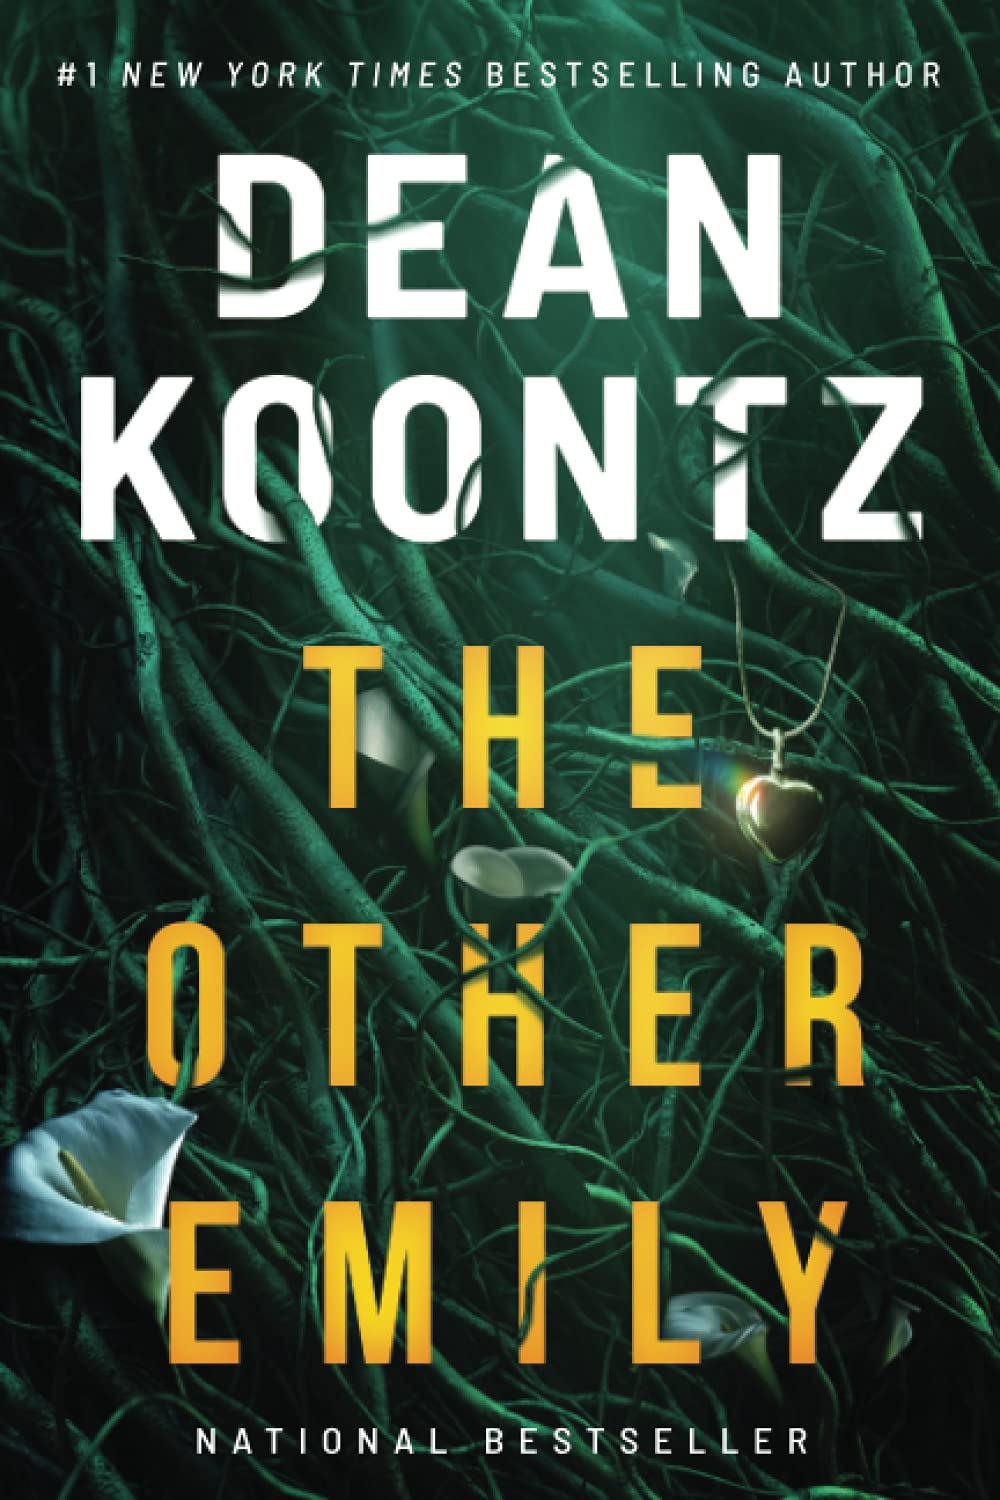 The Other Emily by Koontz, Dean